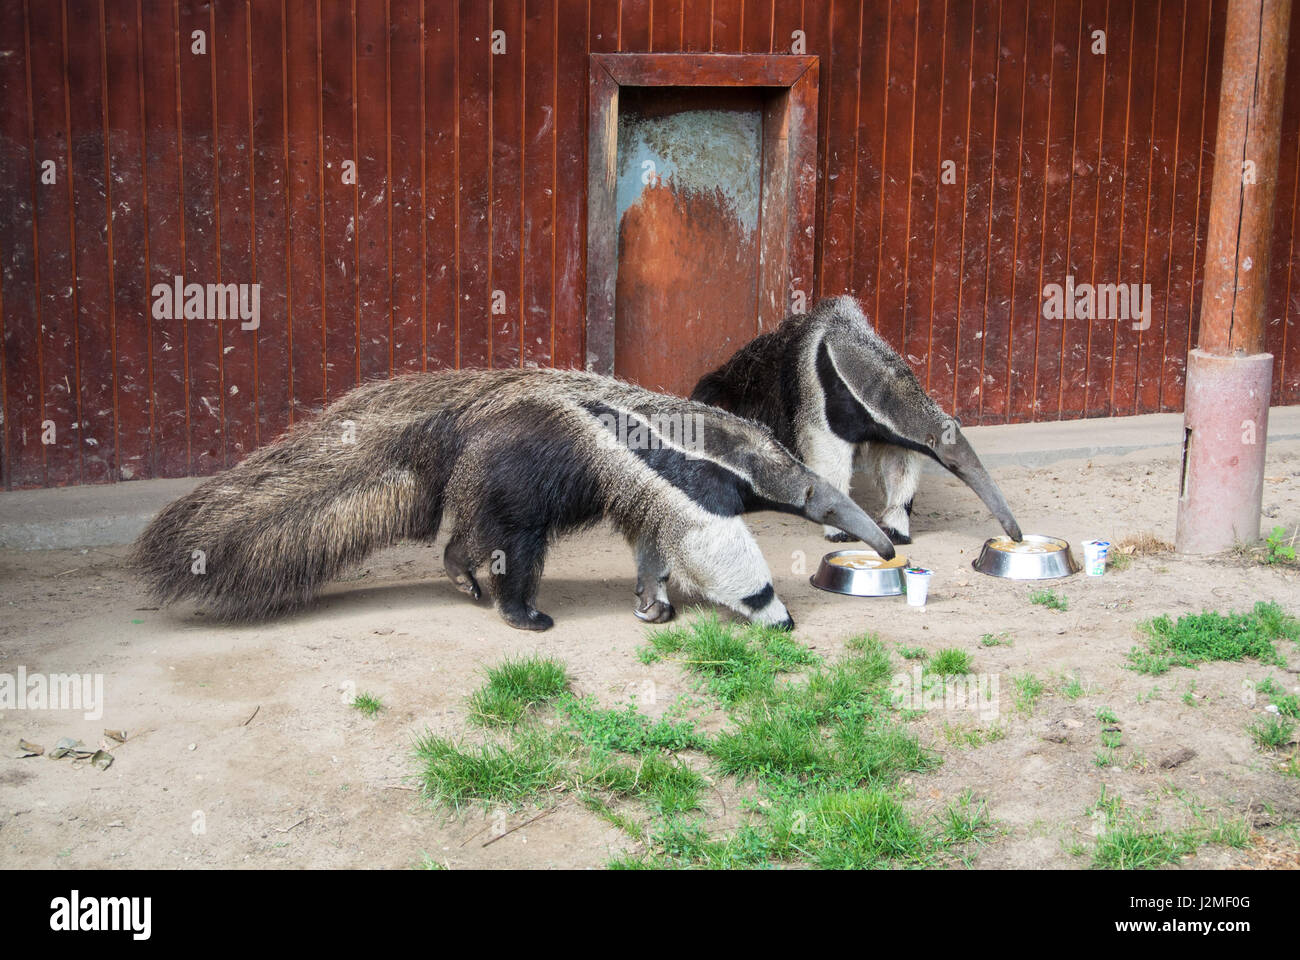 A couple of giant anteaters eat from a plate at Budapest zoo, Hungary. Stock Photo